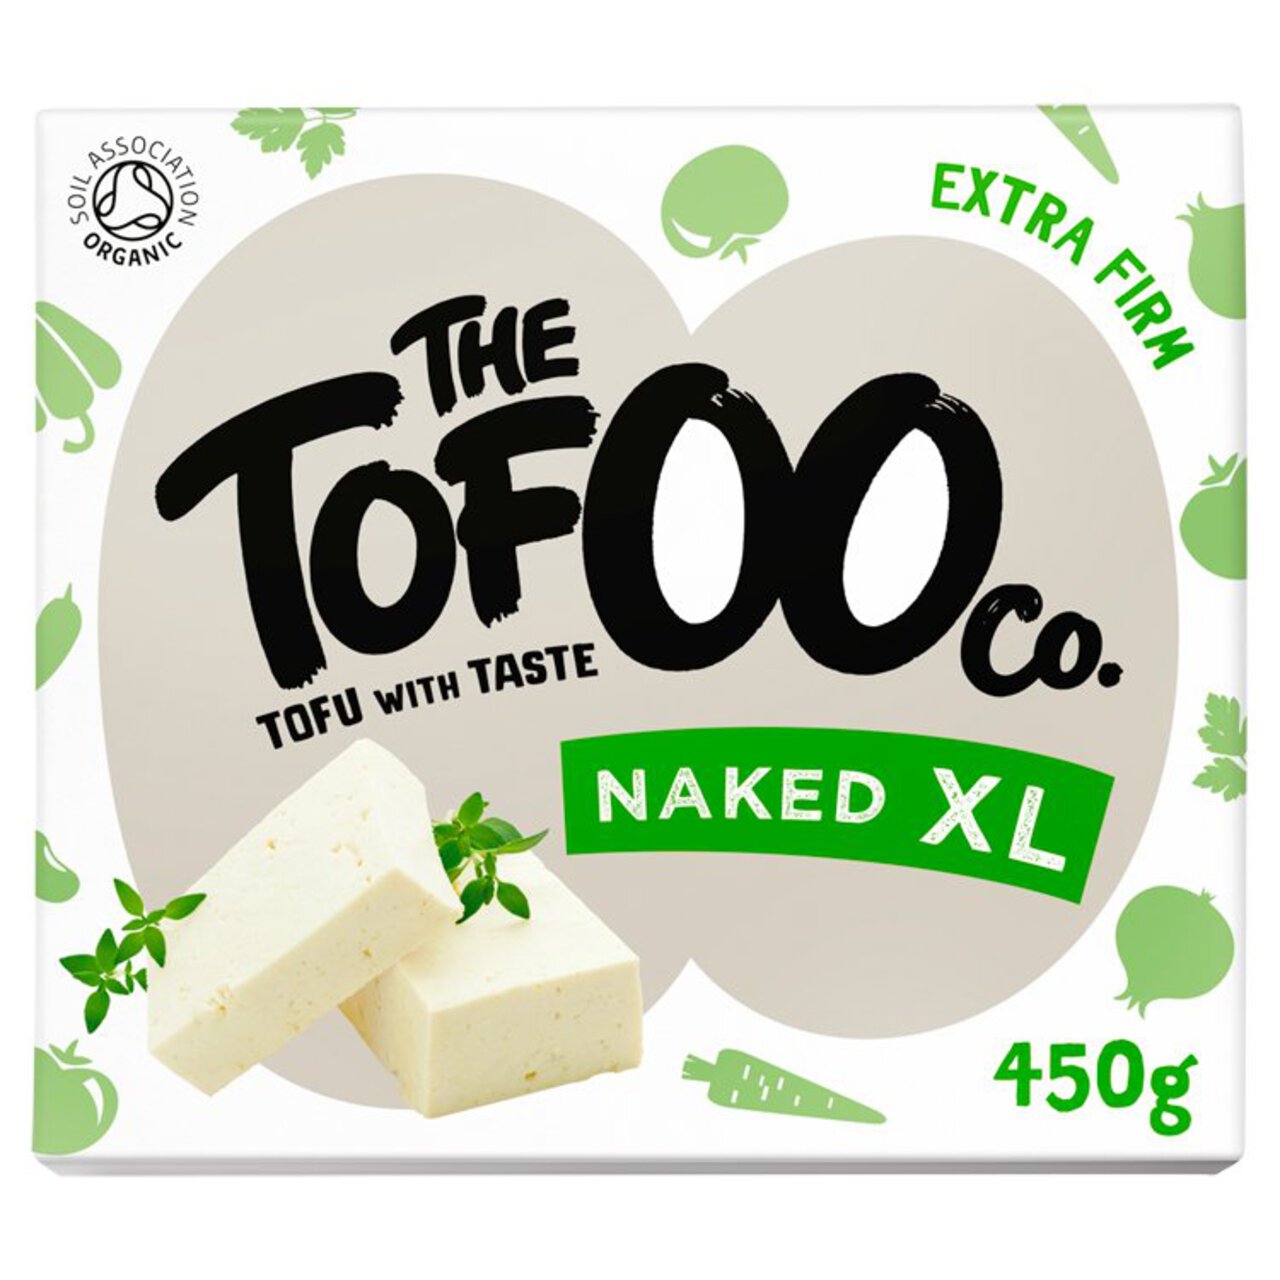 The Tofoo Co Naked Organic XL 450g